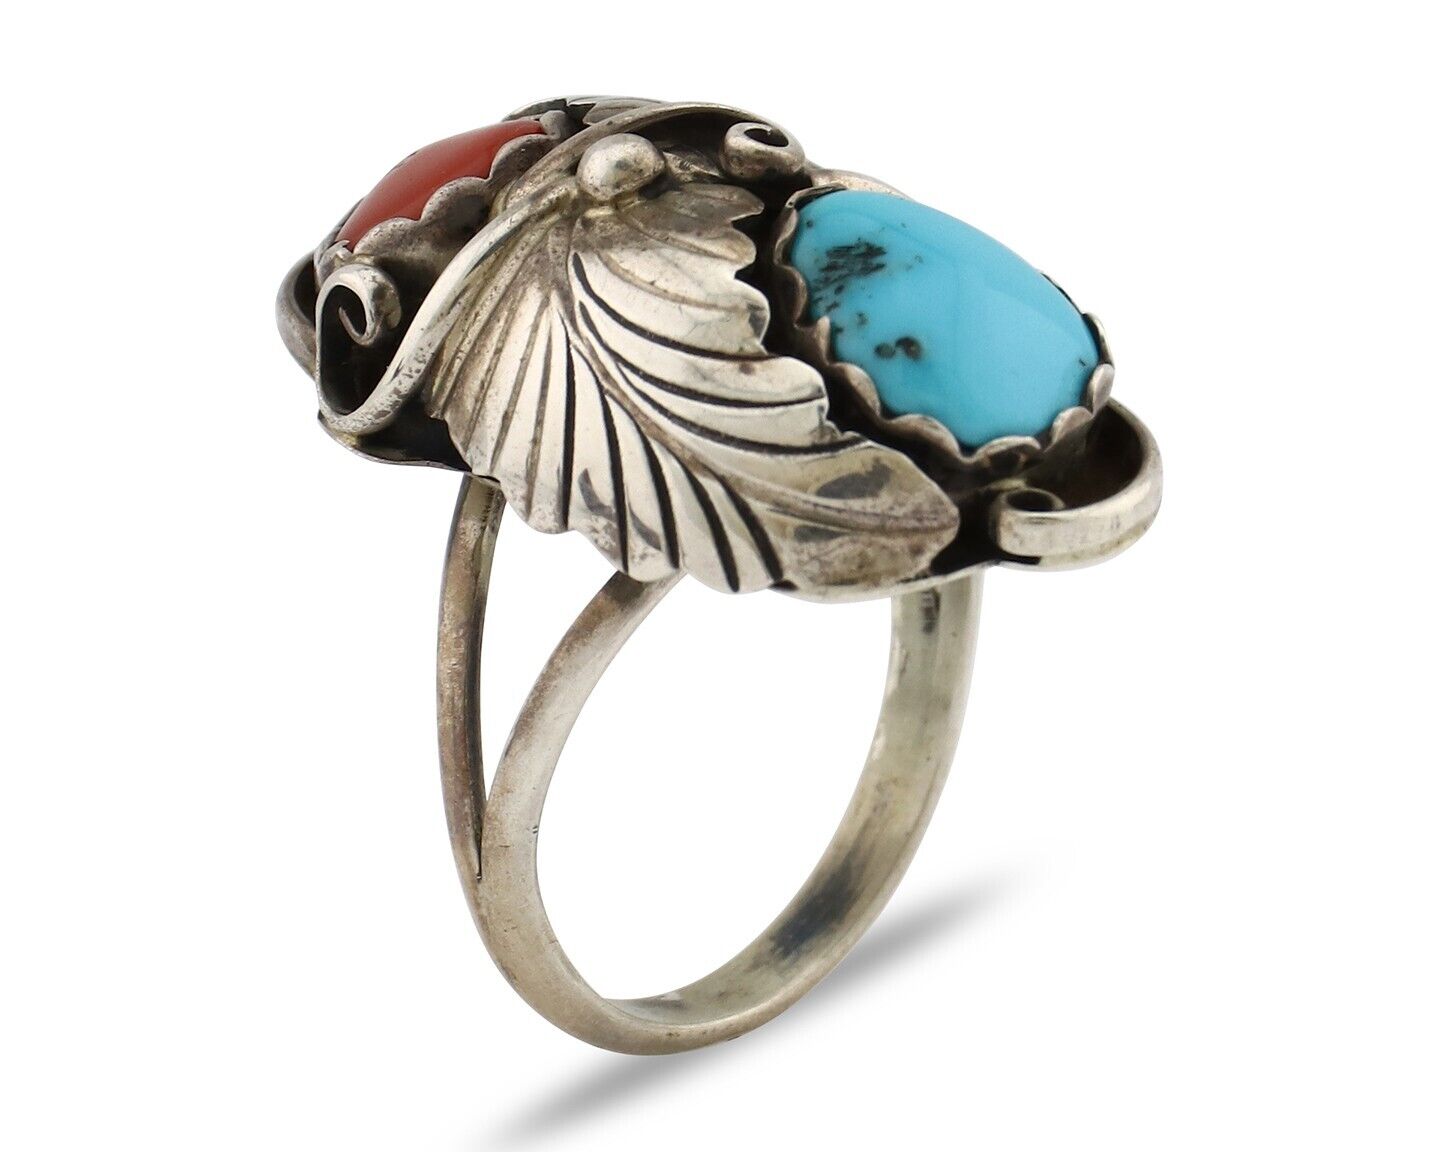 Navajo Handmade Ring 925 Silver Turquiose & Coral Artist Signed E C.80's